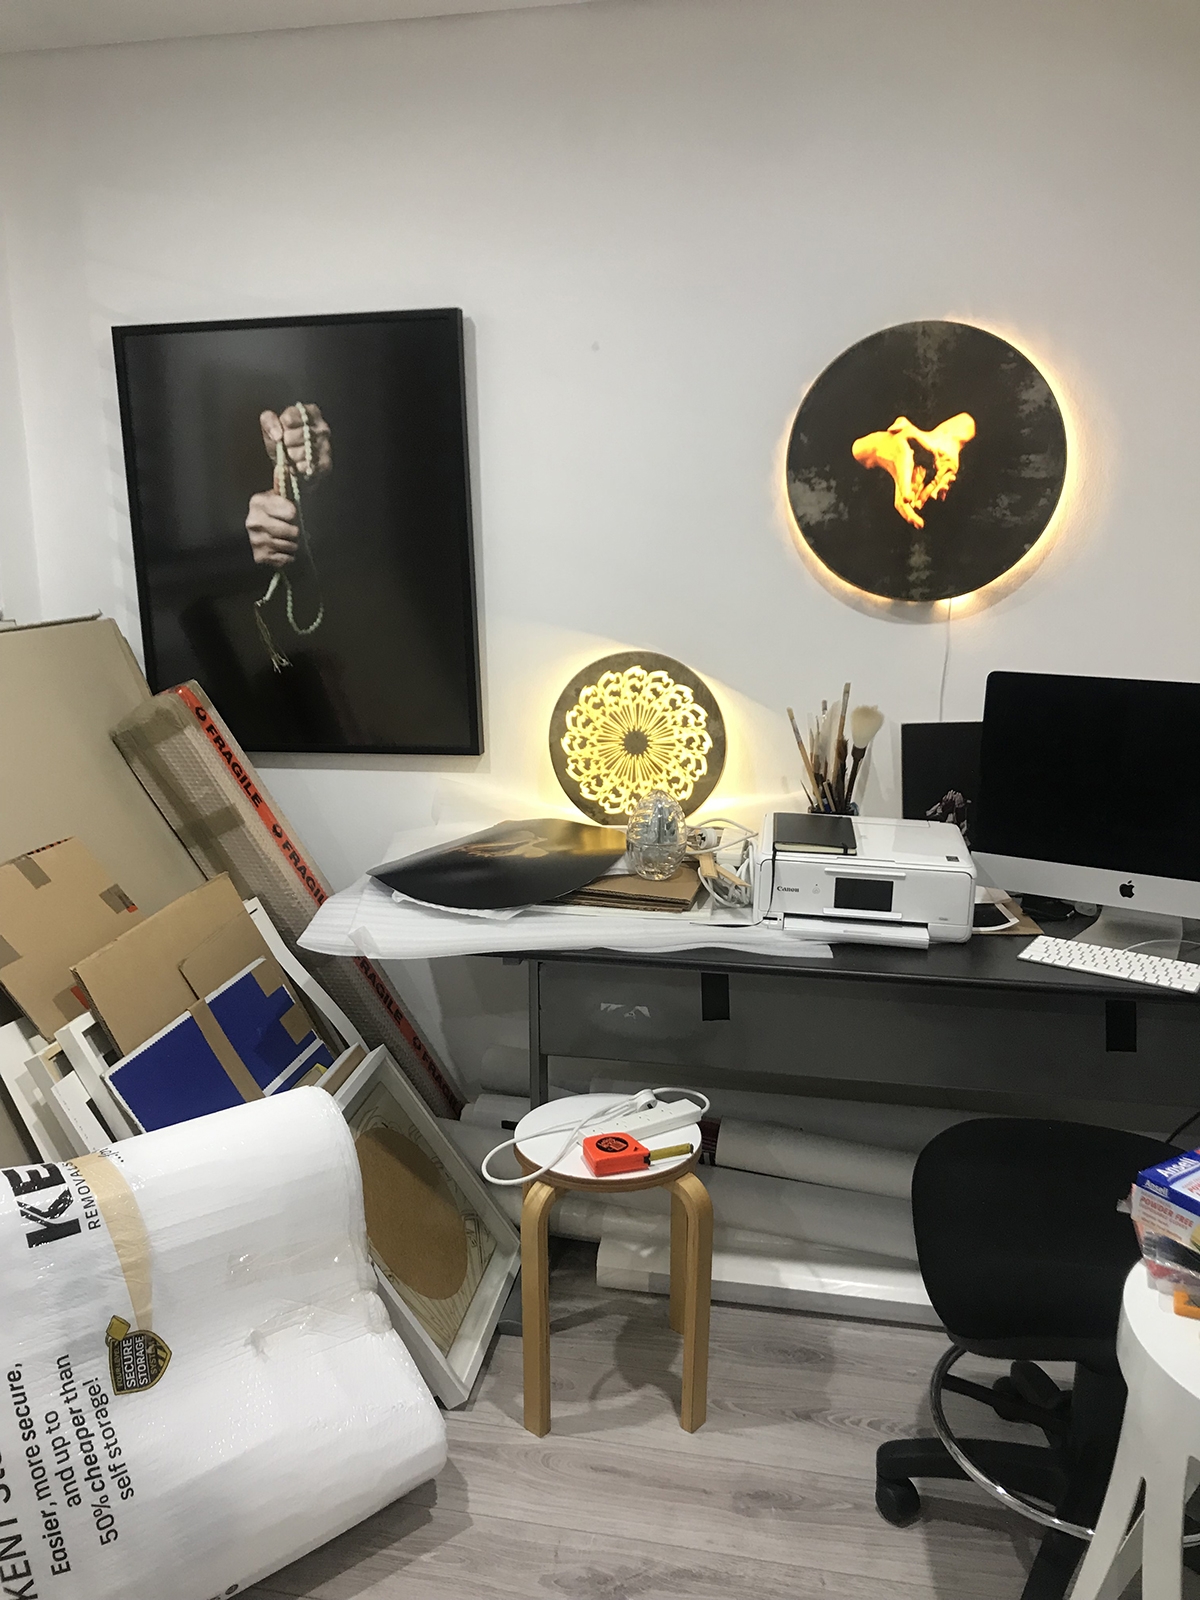 A framed photograph of hands, a stack of cardboard, an illumanited graphic artwork, a computer screen, and a stool are among the items seen in a white room.